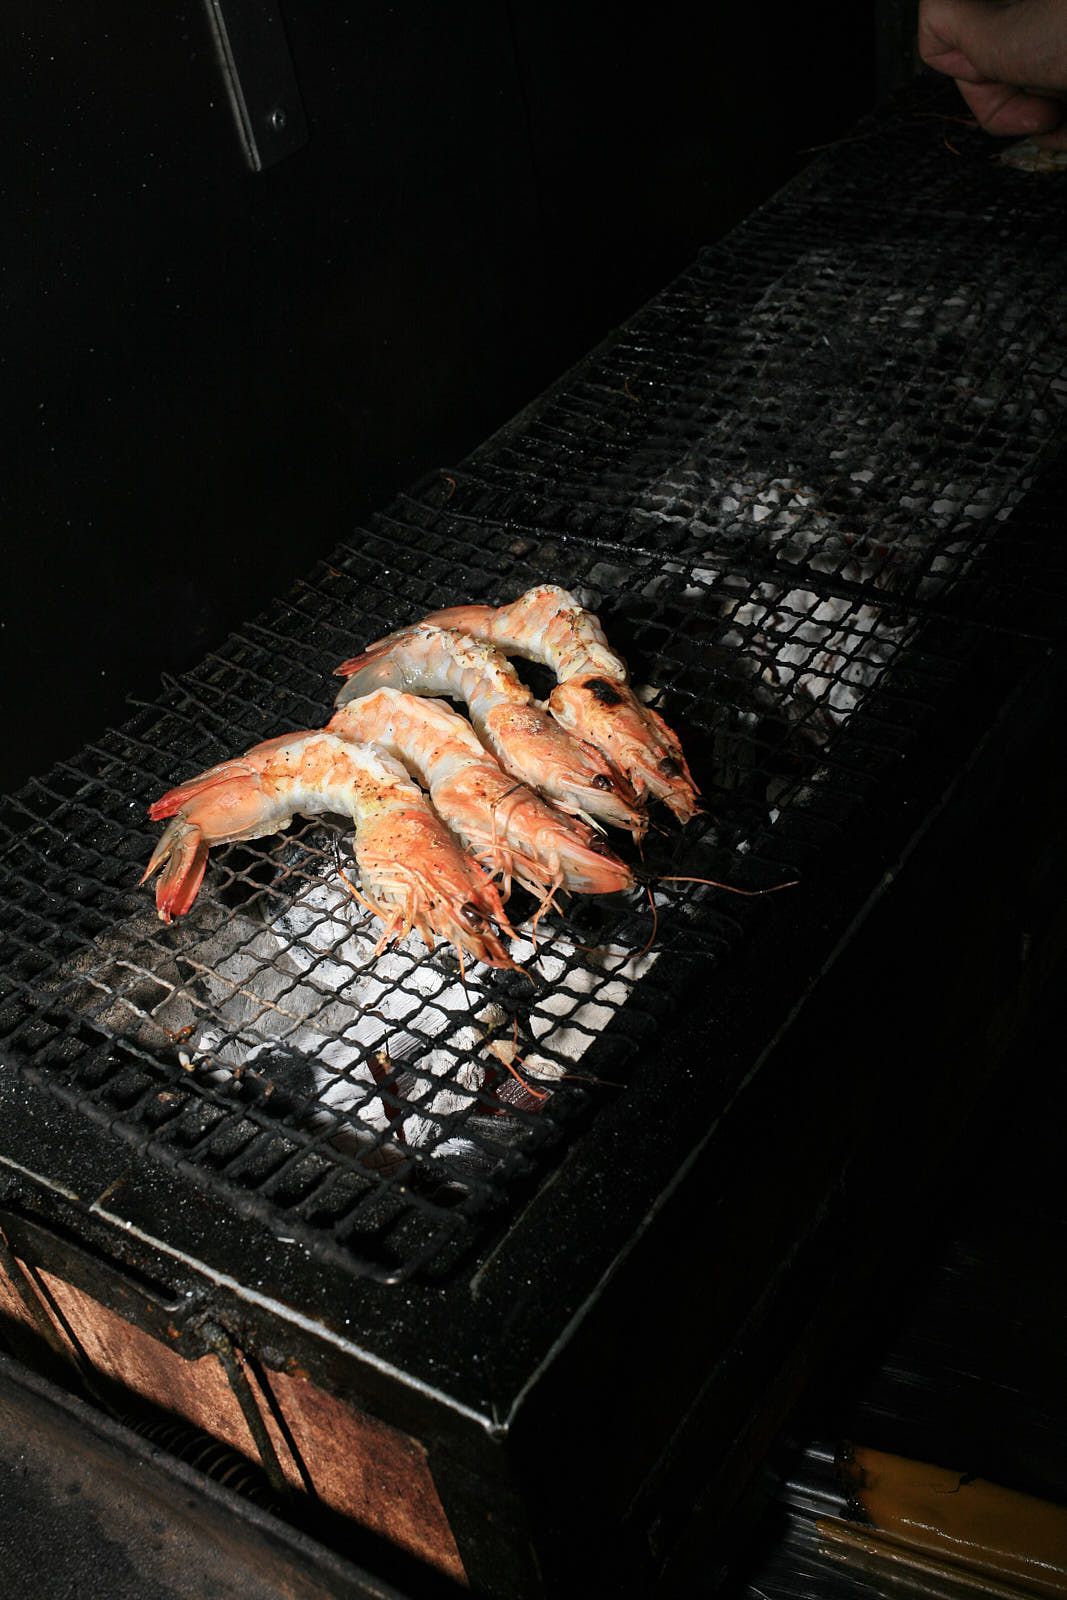 Four prawns, mid-cook so turning a gentle orange, sit over coals on the grill